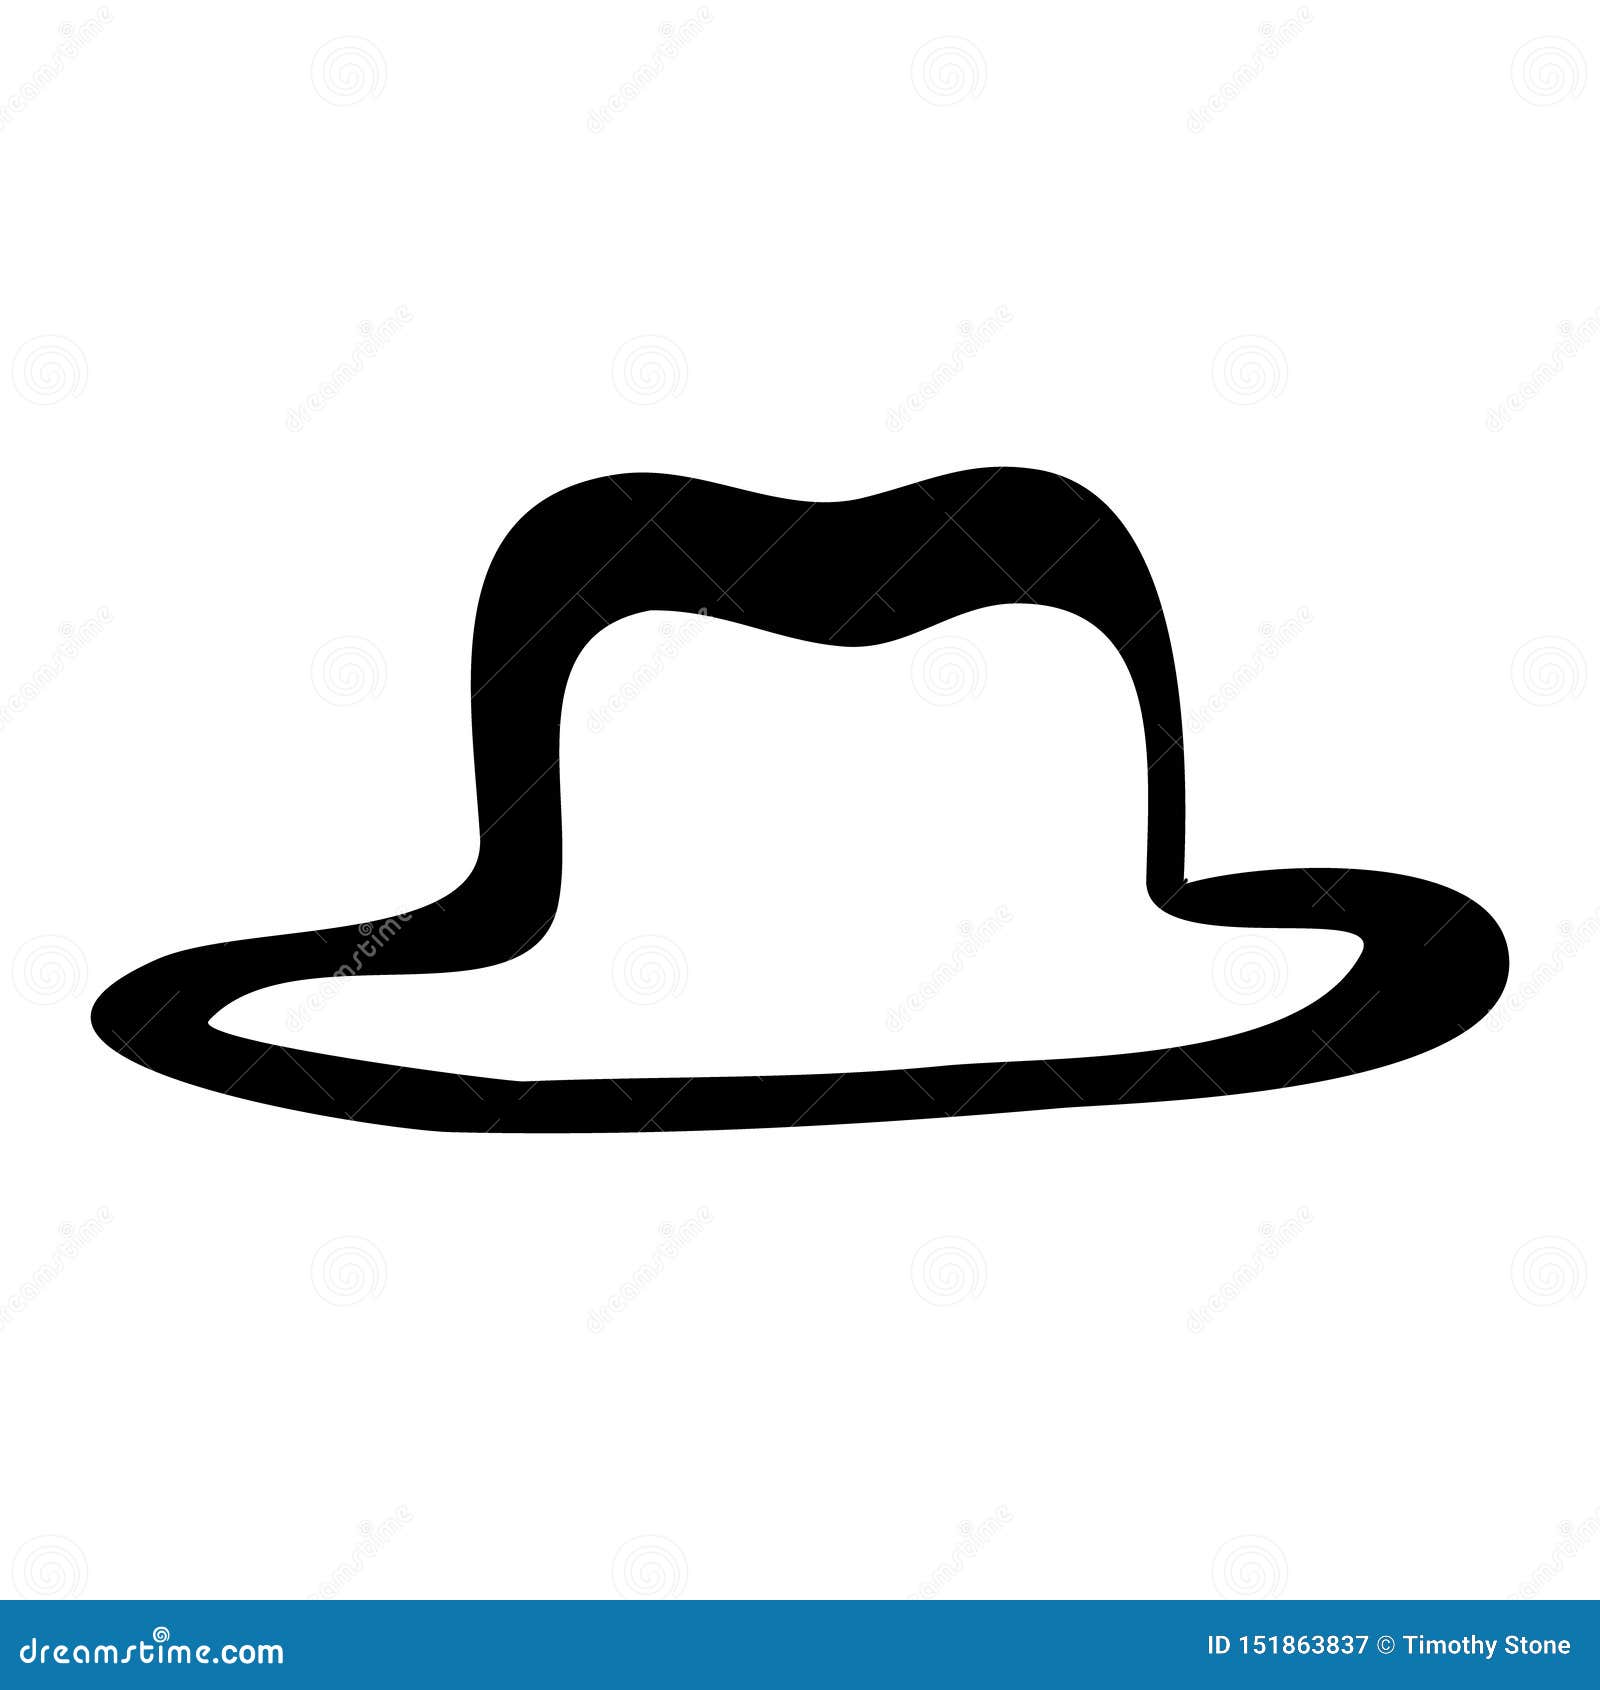 Cowboy Hat Line Art Vector Icon in Black and White Stock Vector ...